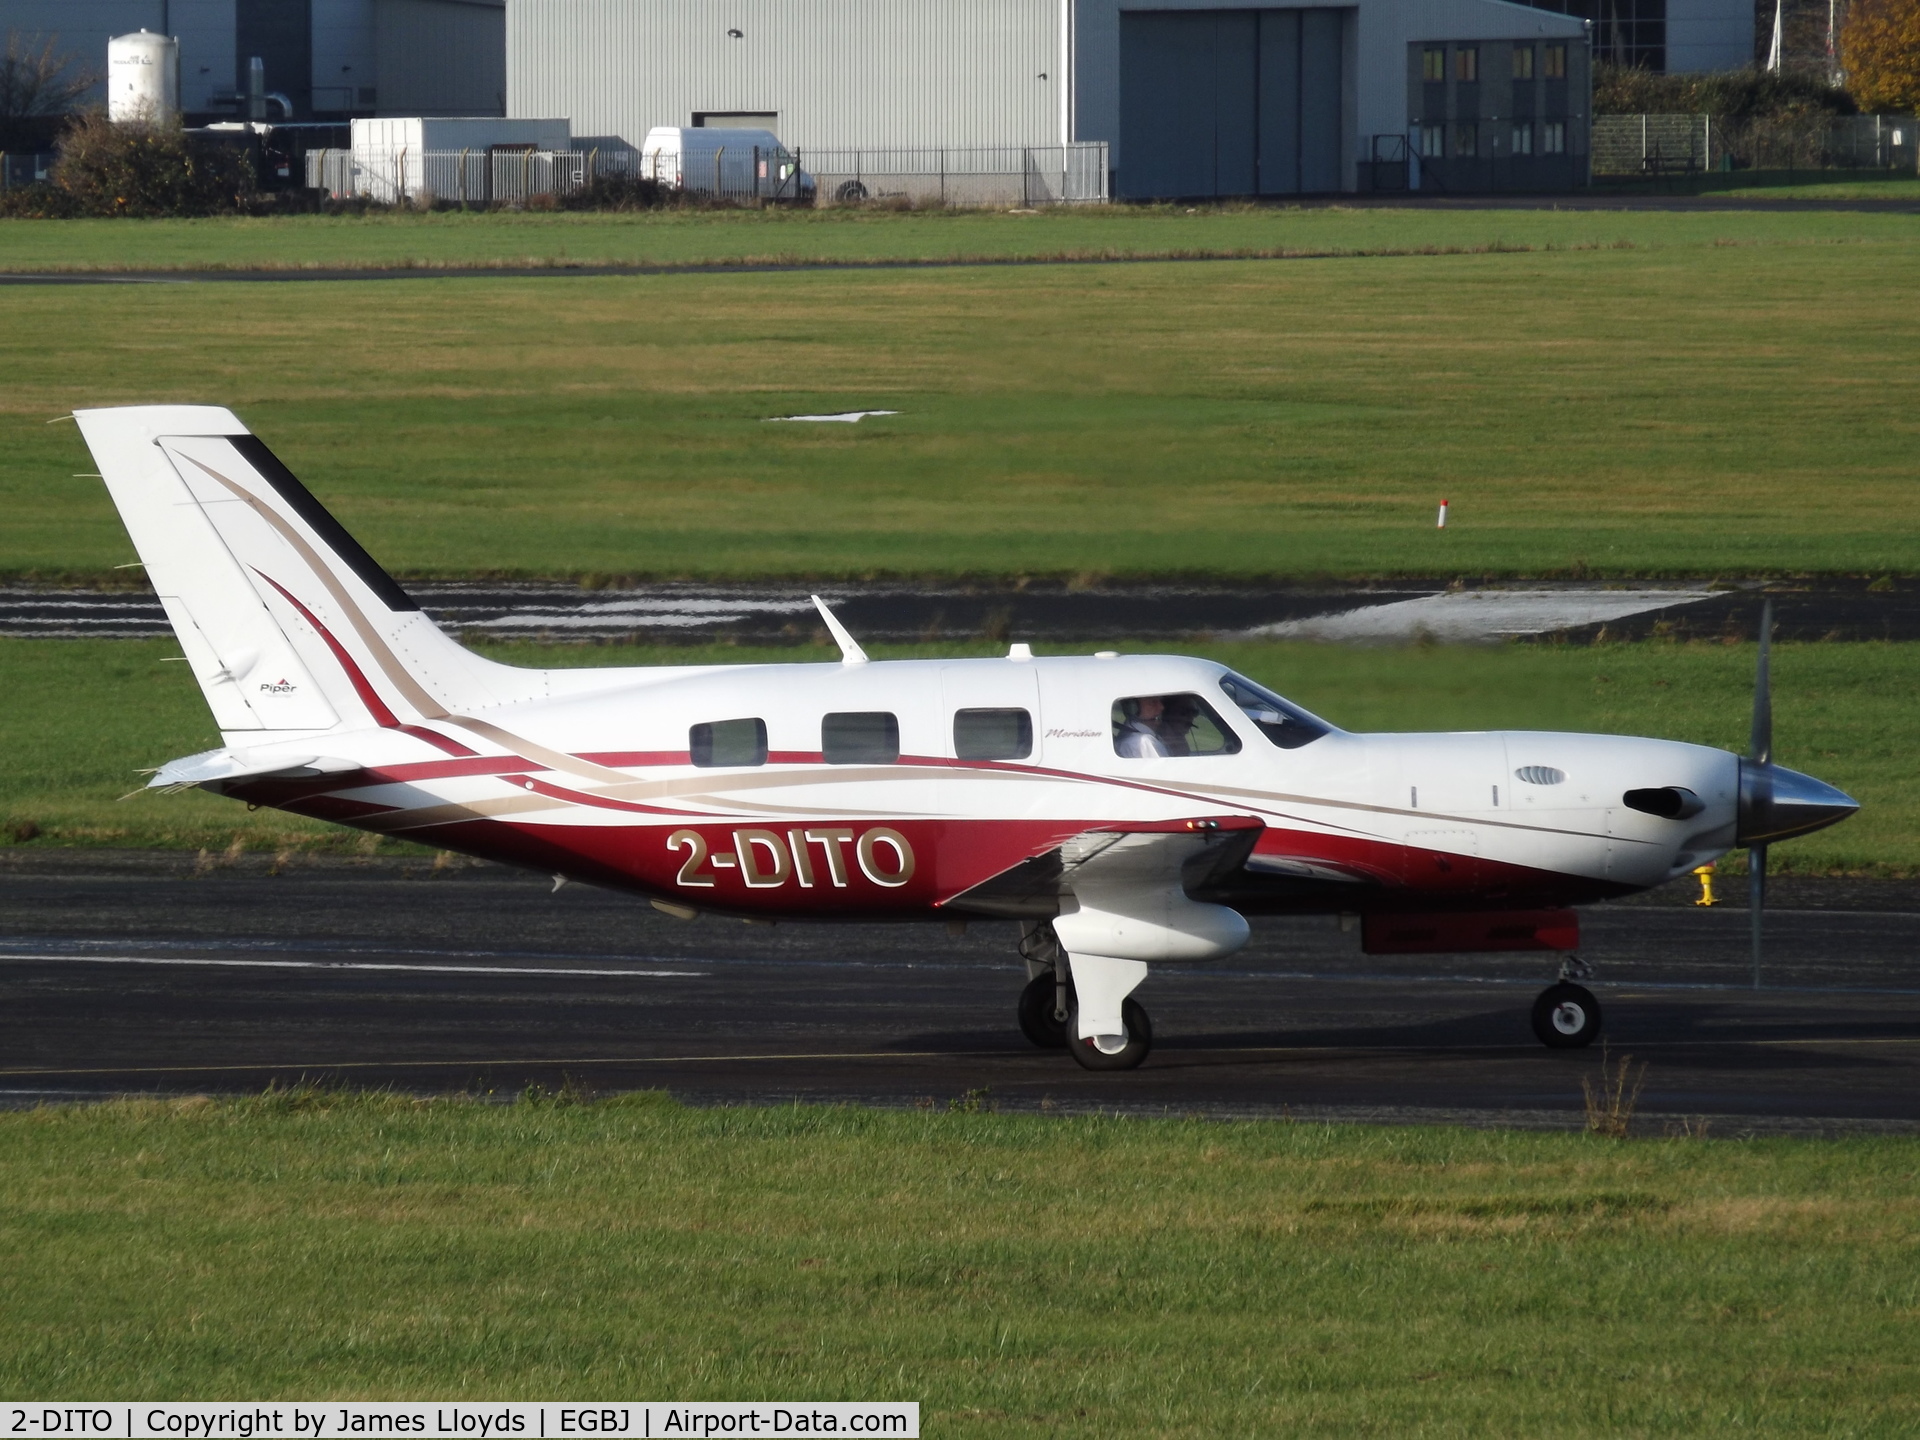 2-DITO, 2006 Piper PA-46-500TP Malibu Meridian C/N 4697244, Taxing to runway 27 at Gloucestershire Airport.